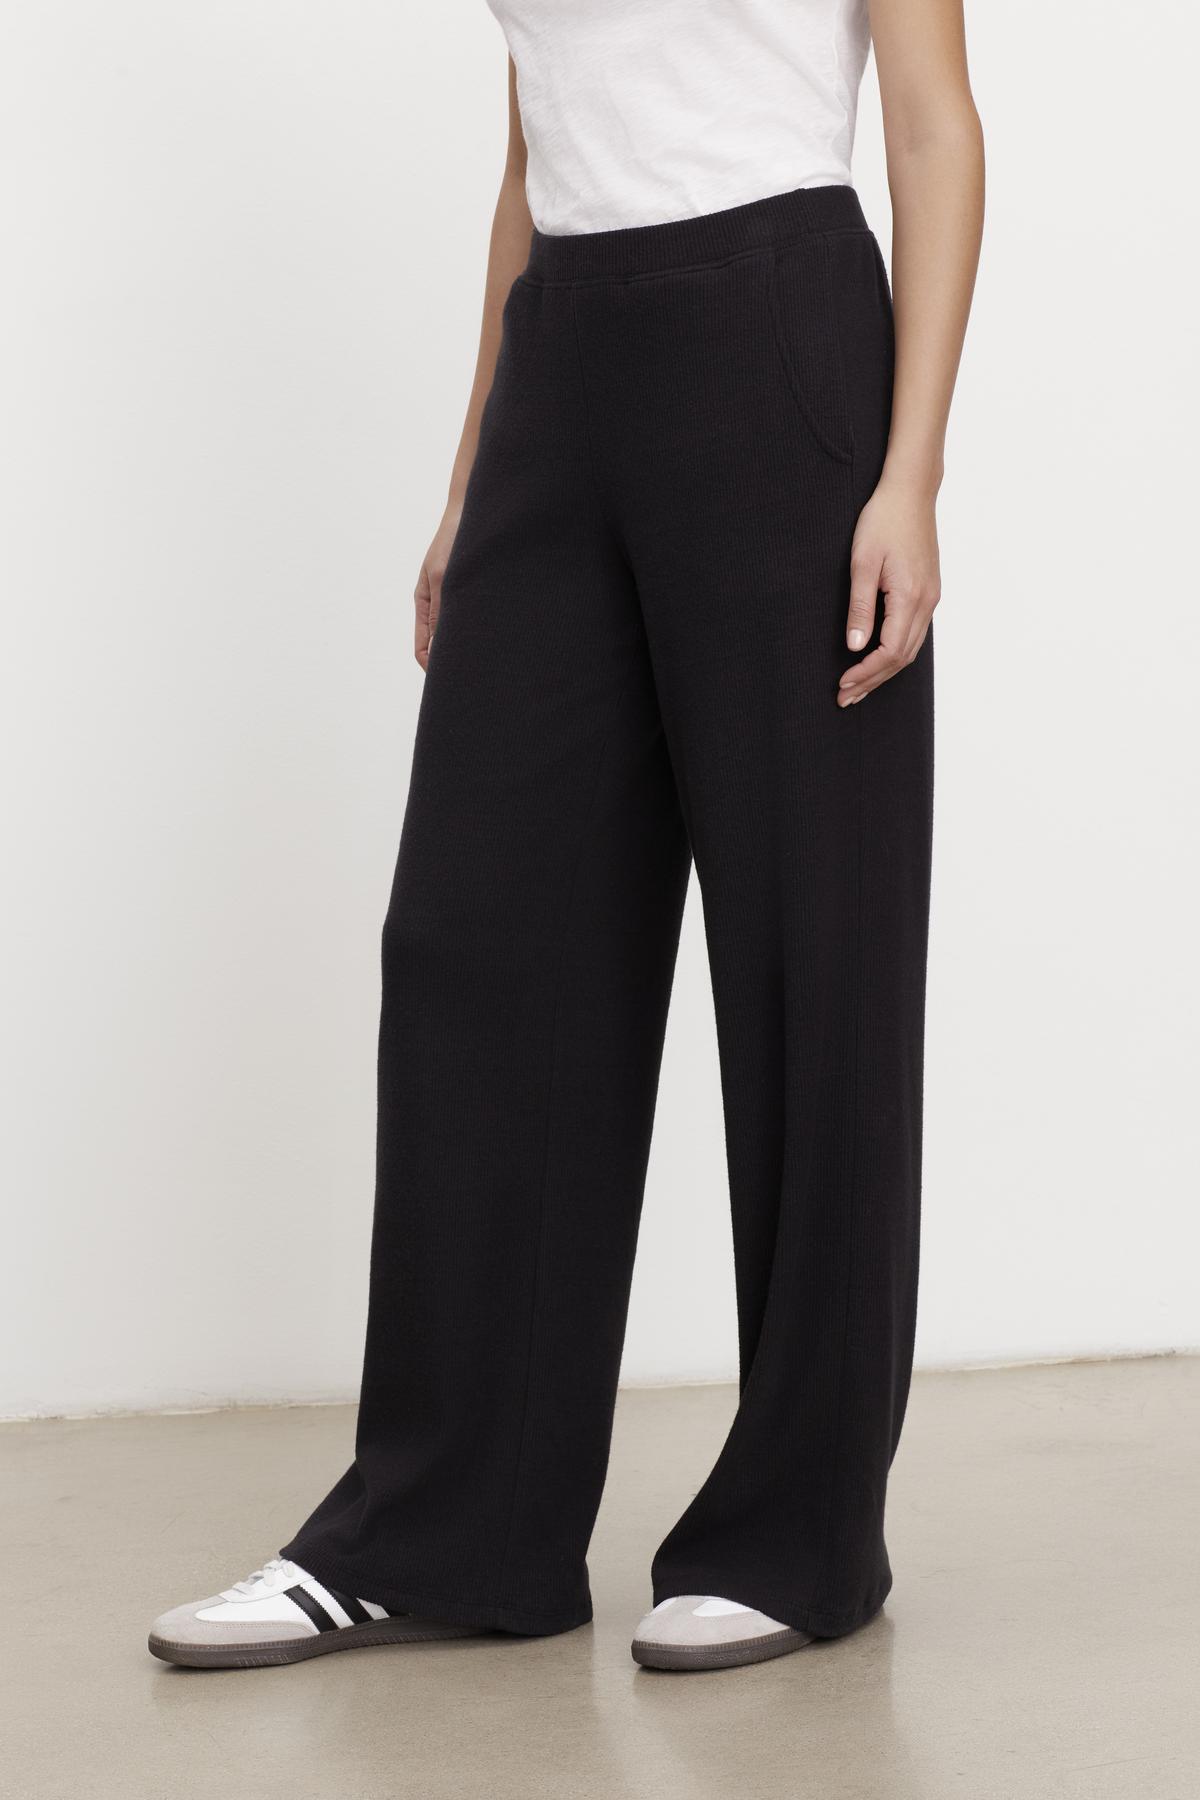 A woman wearing Velvet by Graham & Spencer's KACIE BRUSHED RIB PANT wide leg pants and a white t-shirt.-35701975318721